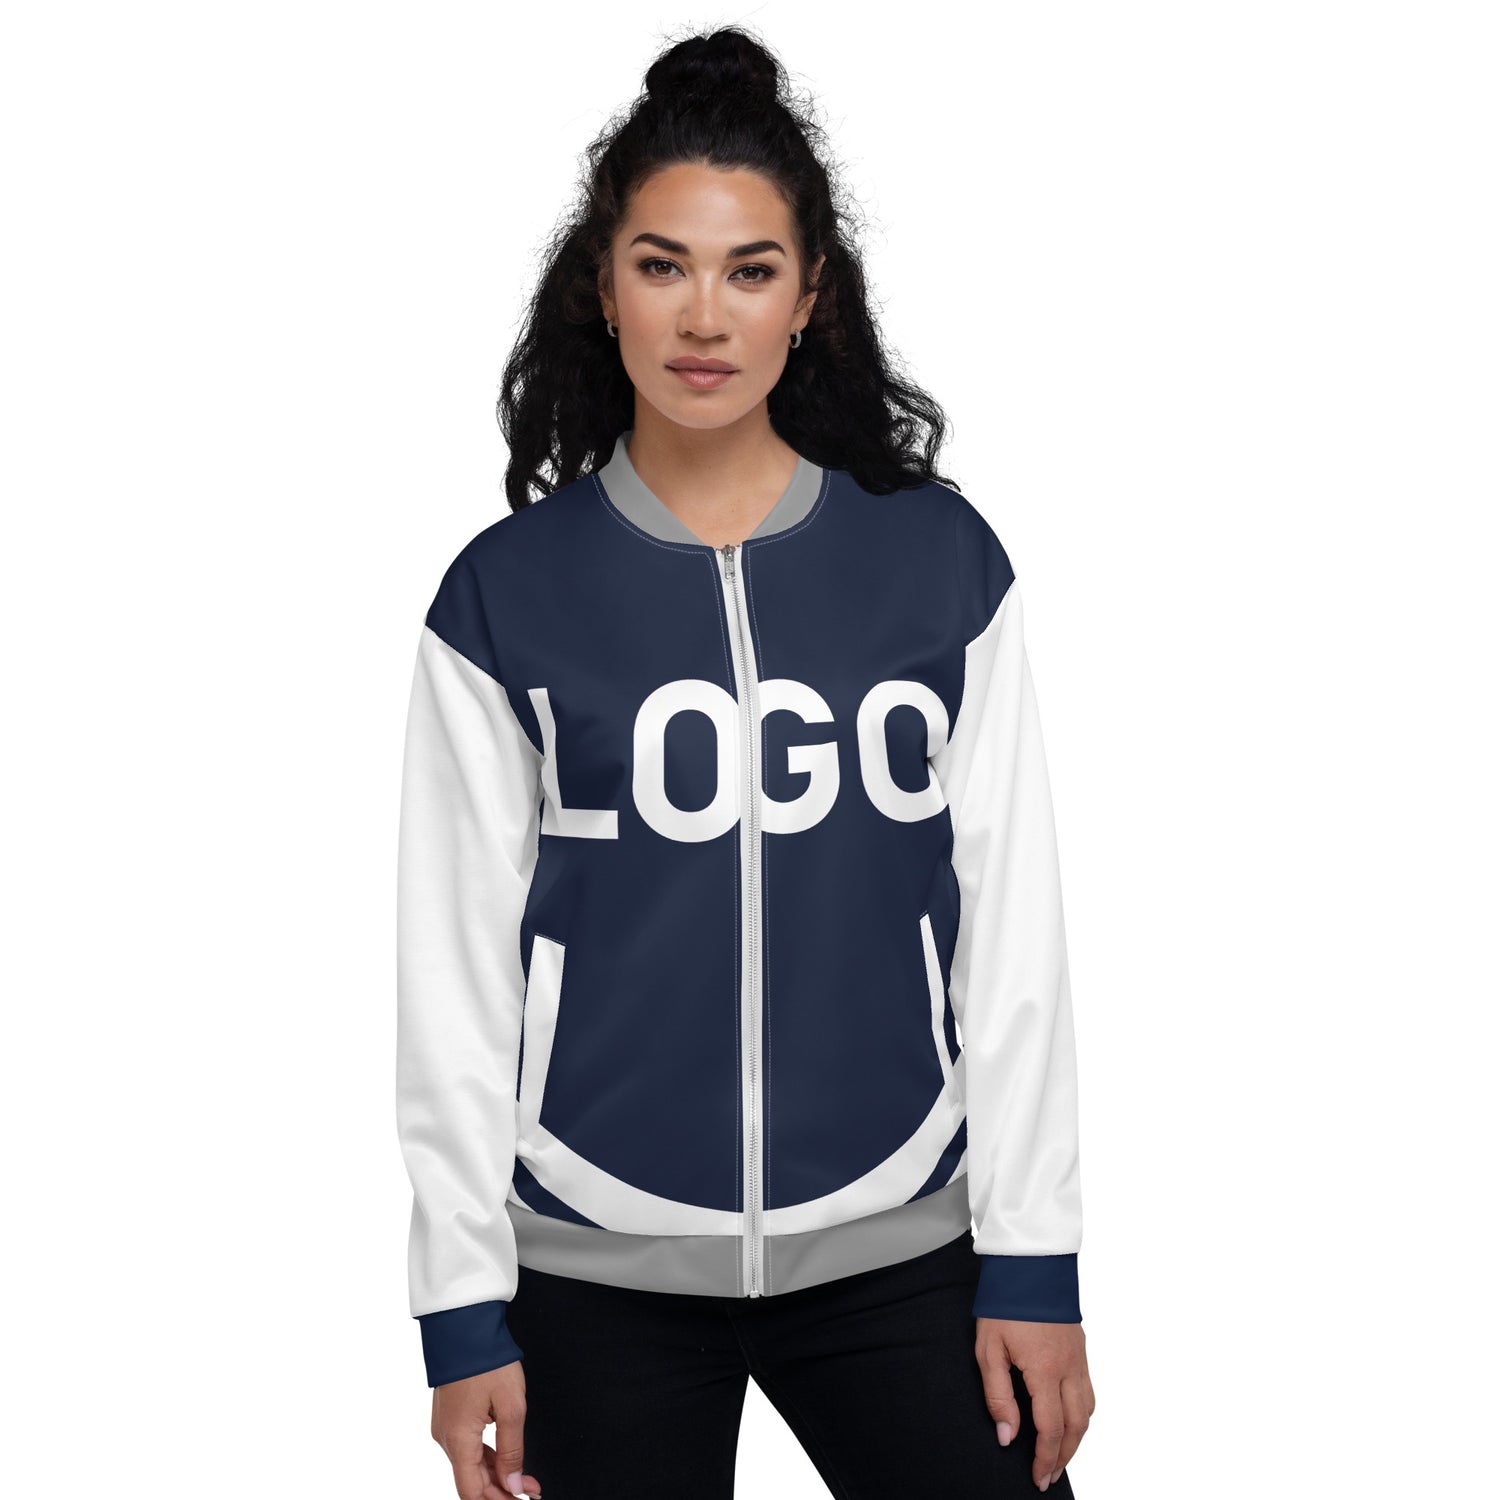 TIME OF VIBES TOV Jacke CORPORATE - €99,00